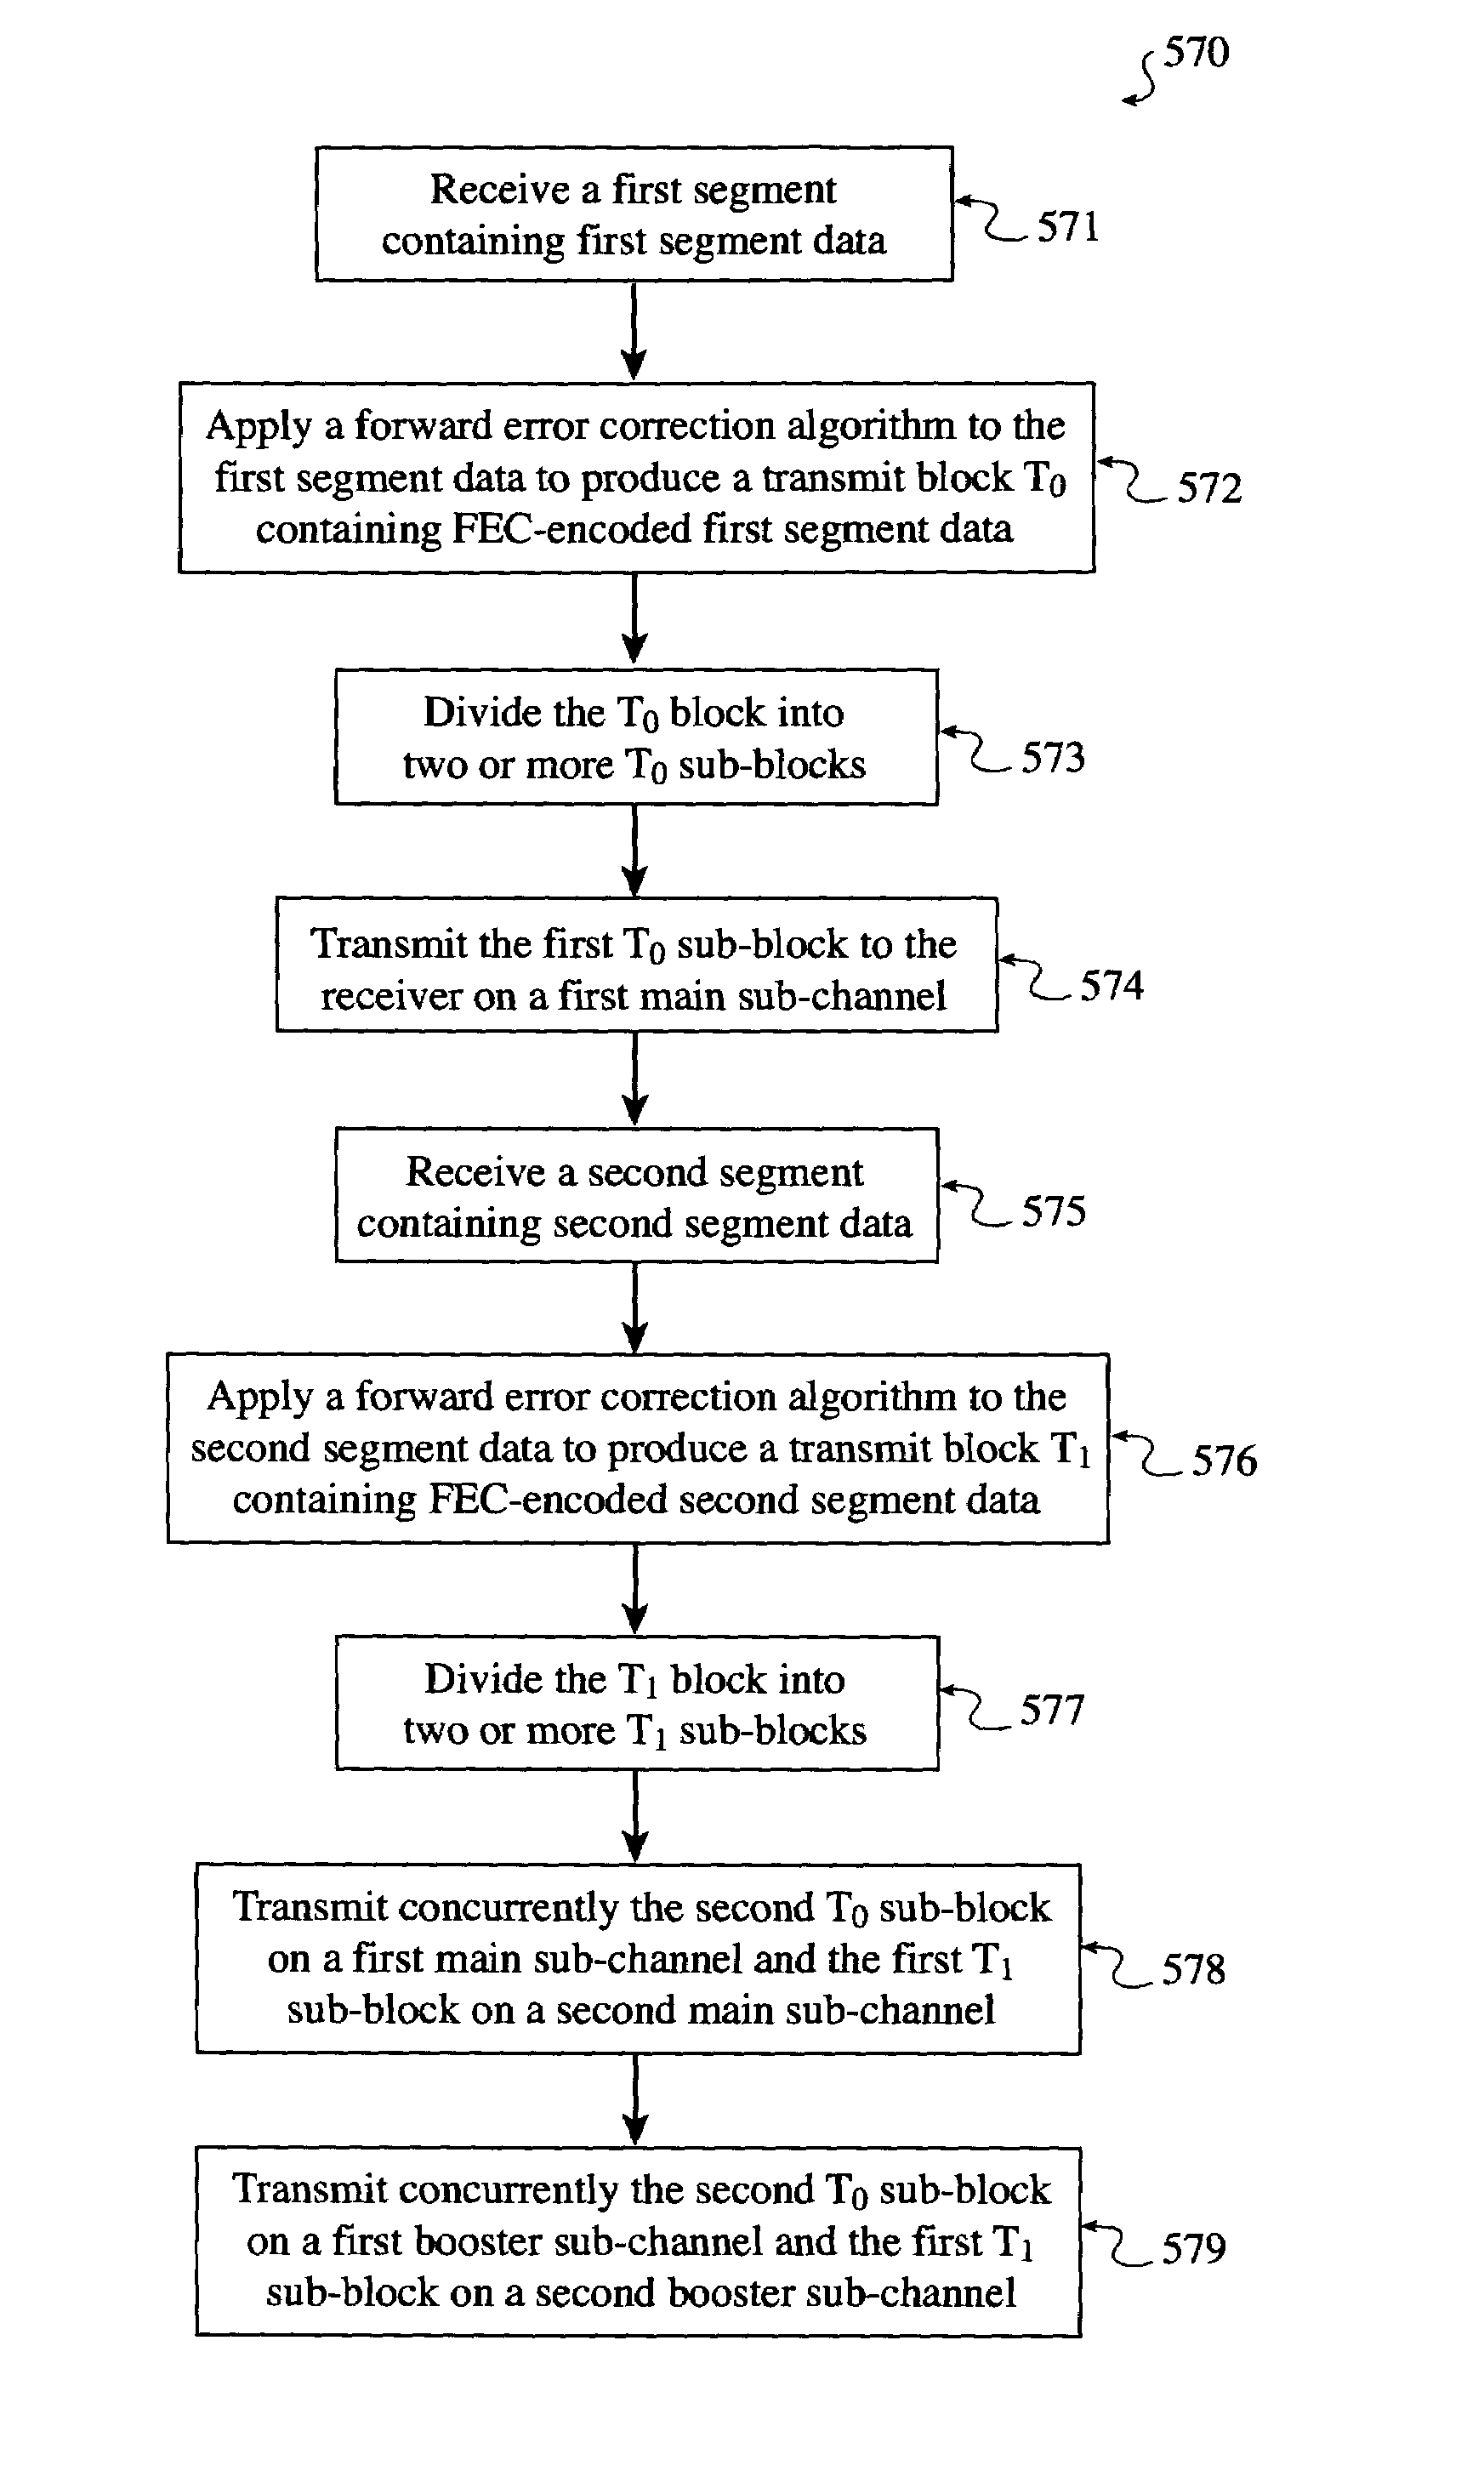 System and method for reliably communicating the content of a live data stream